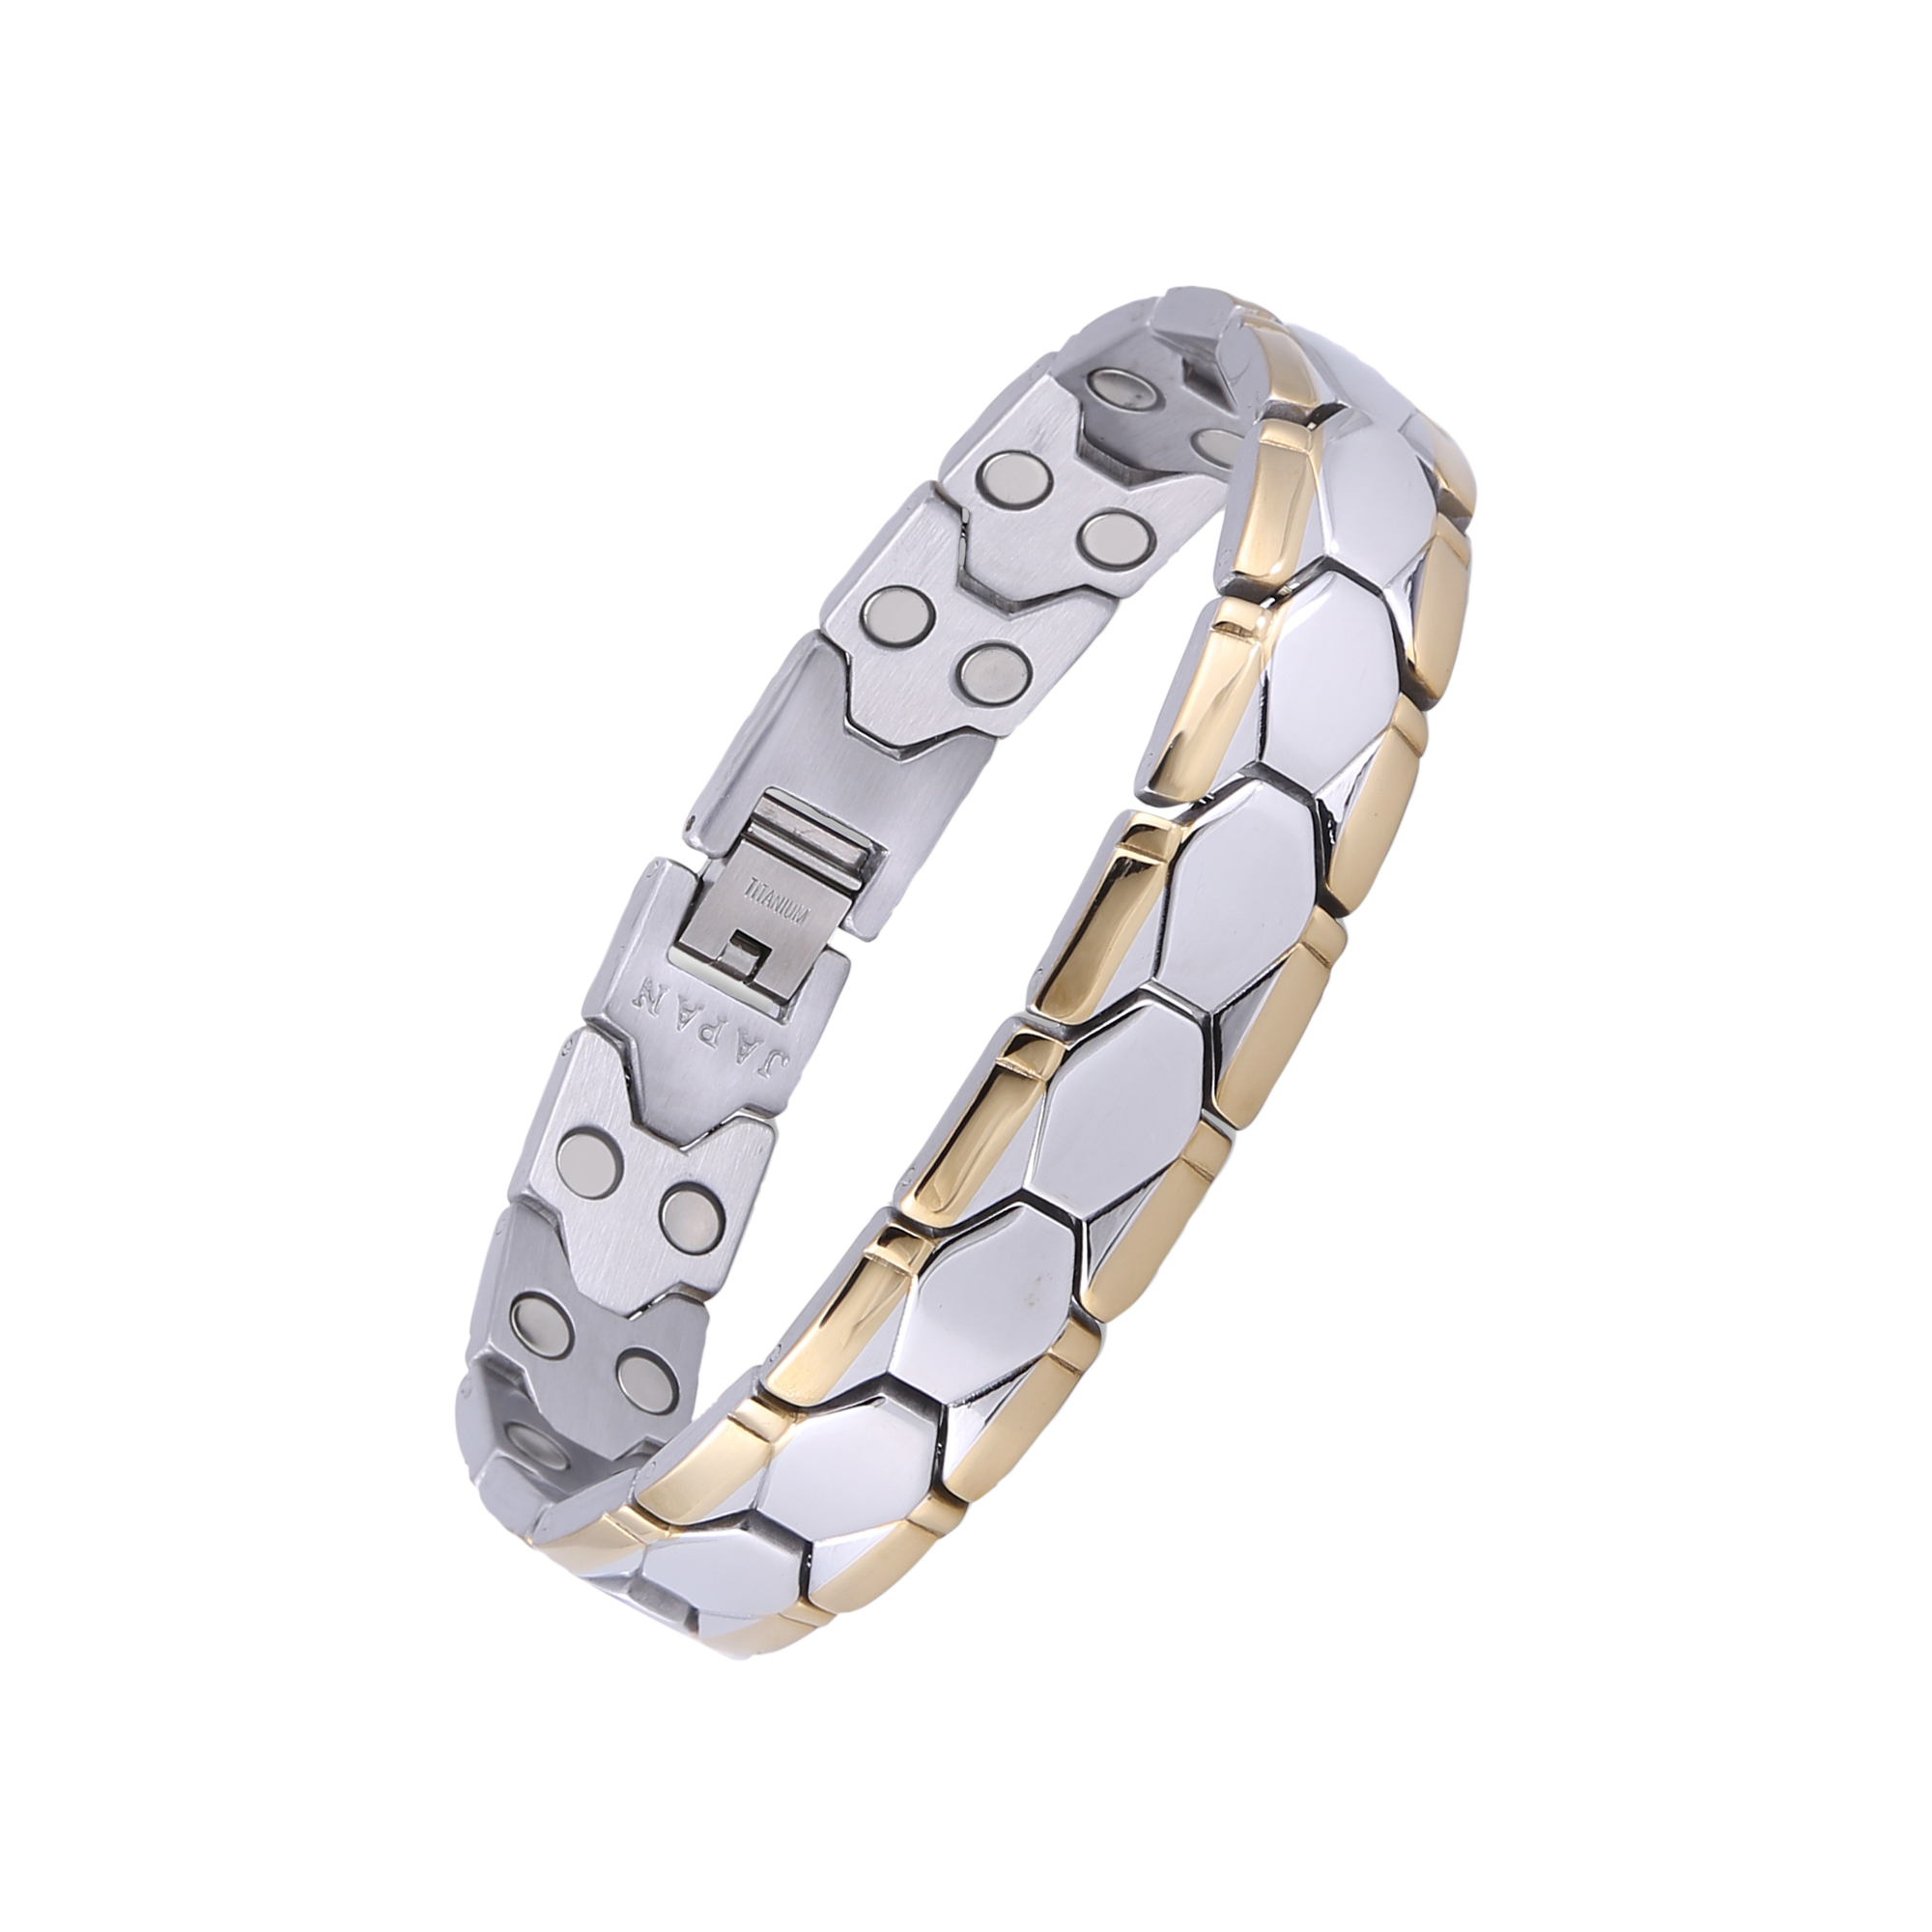 Bio-Magnetic Bracelet | Products | Zowa Medical | Healthy Living for 21st  Century